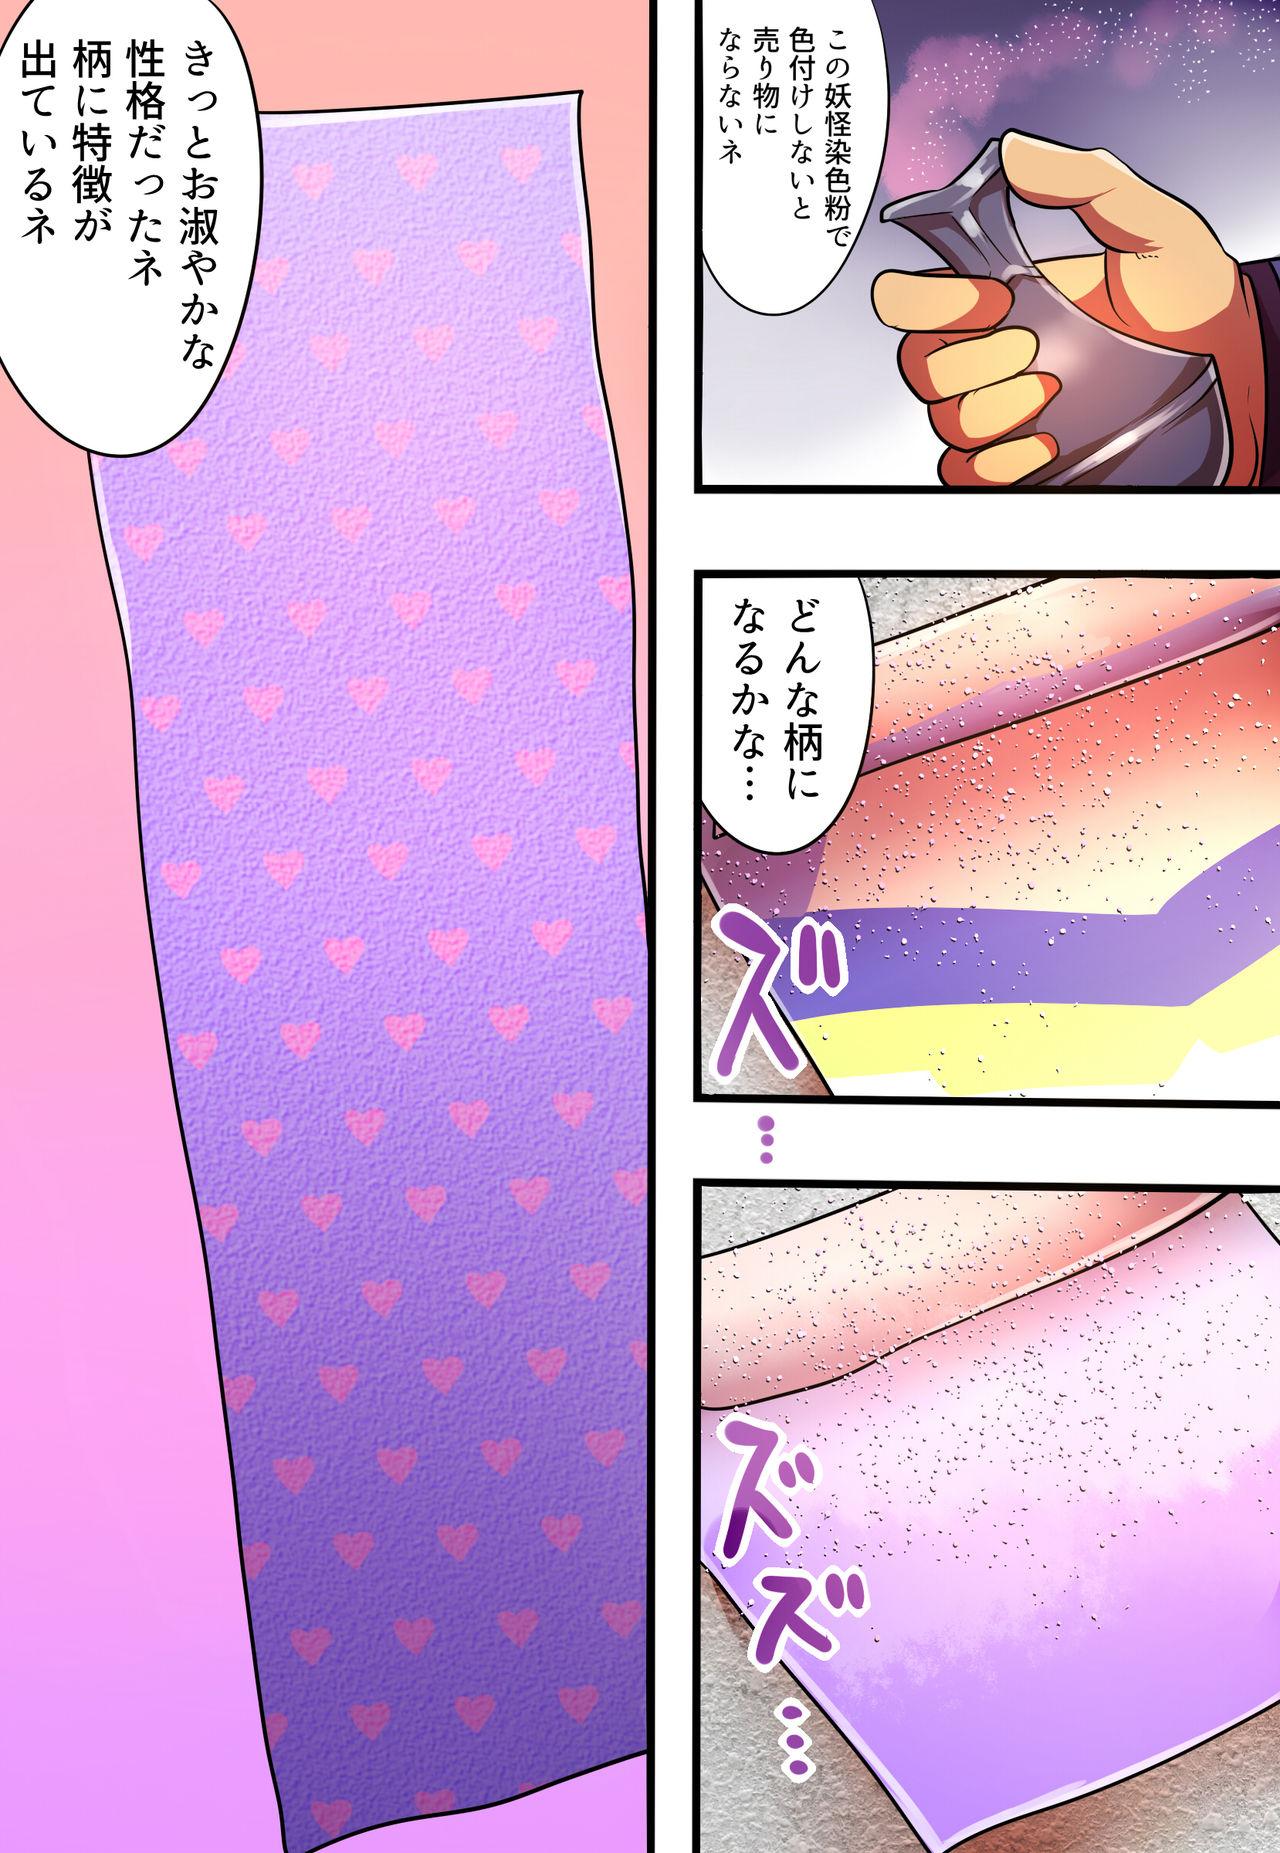 shinenkan Comic of Textile-ification ghost storys 4